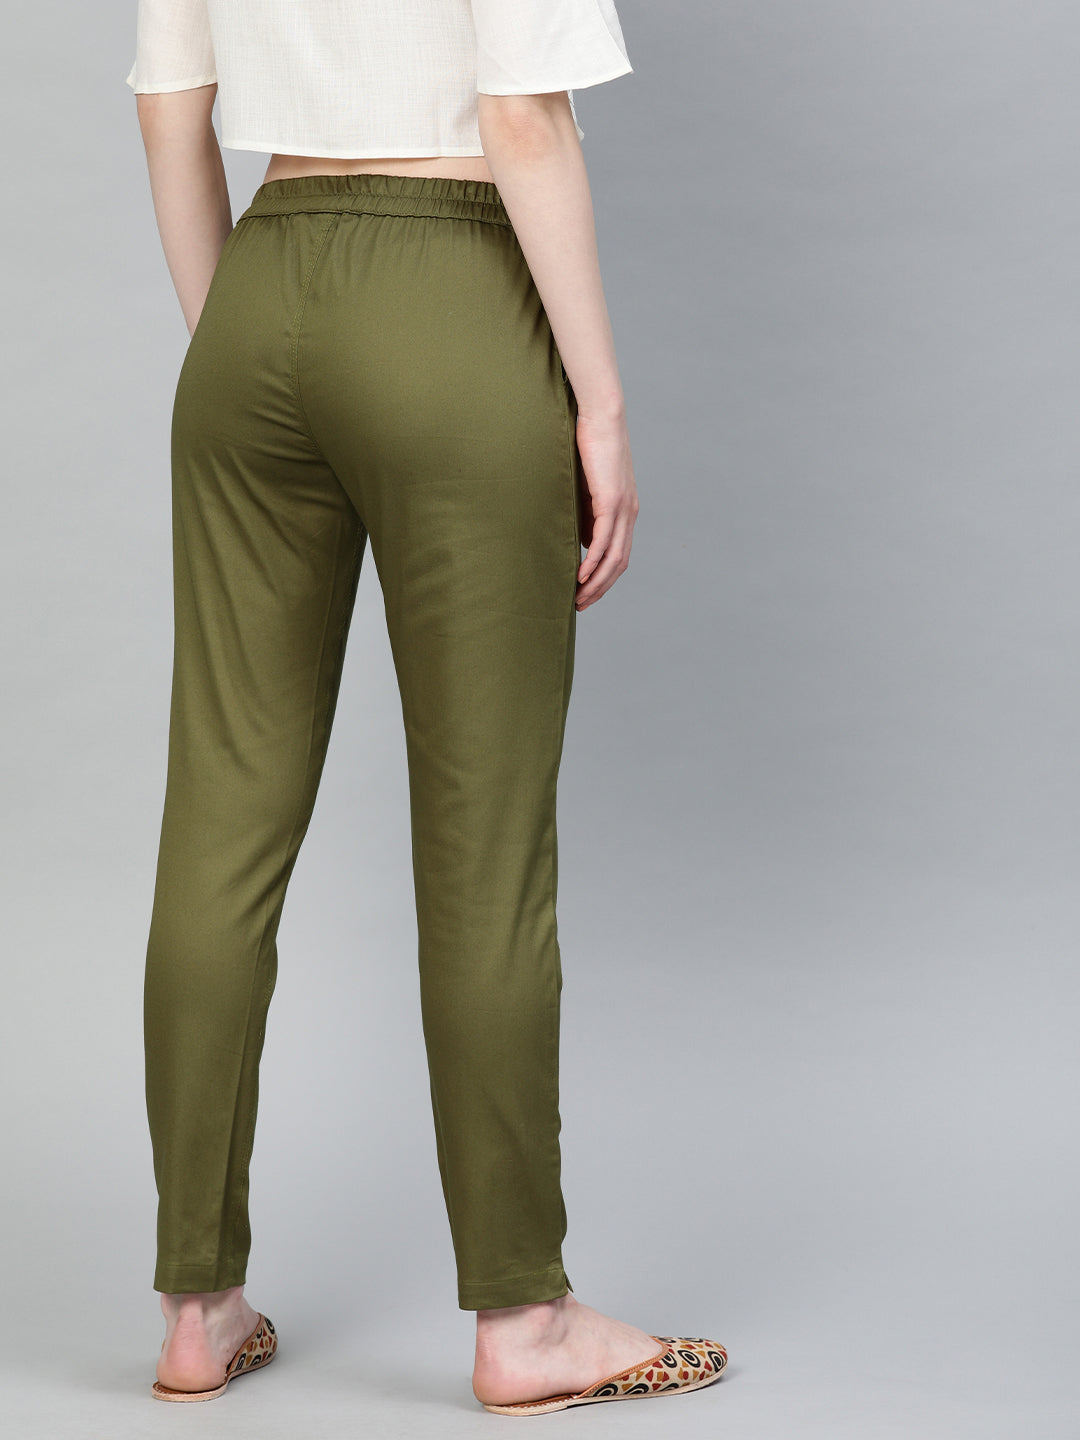 Olive Green Solid Cotton Lycra Pleated Pants